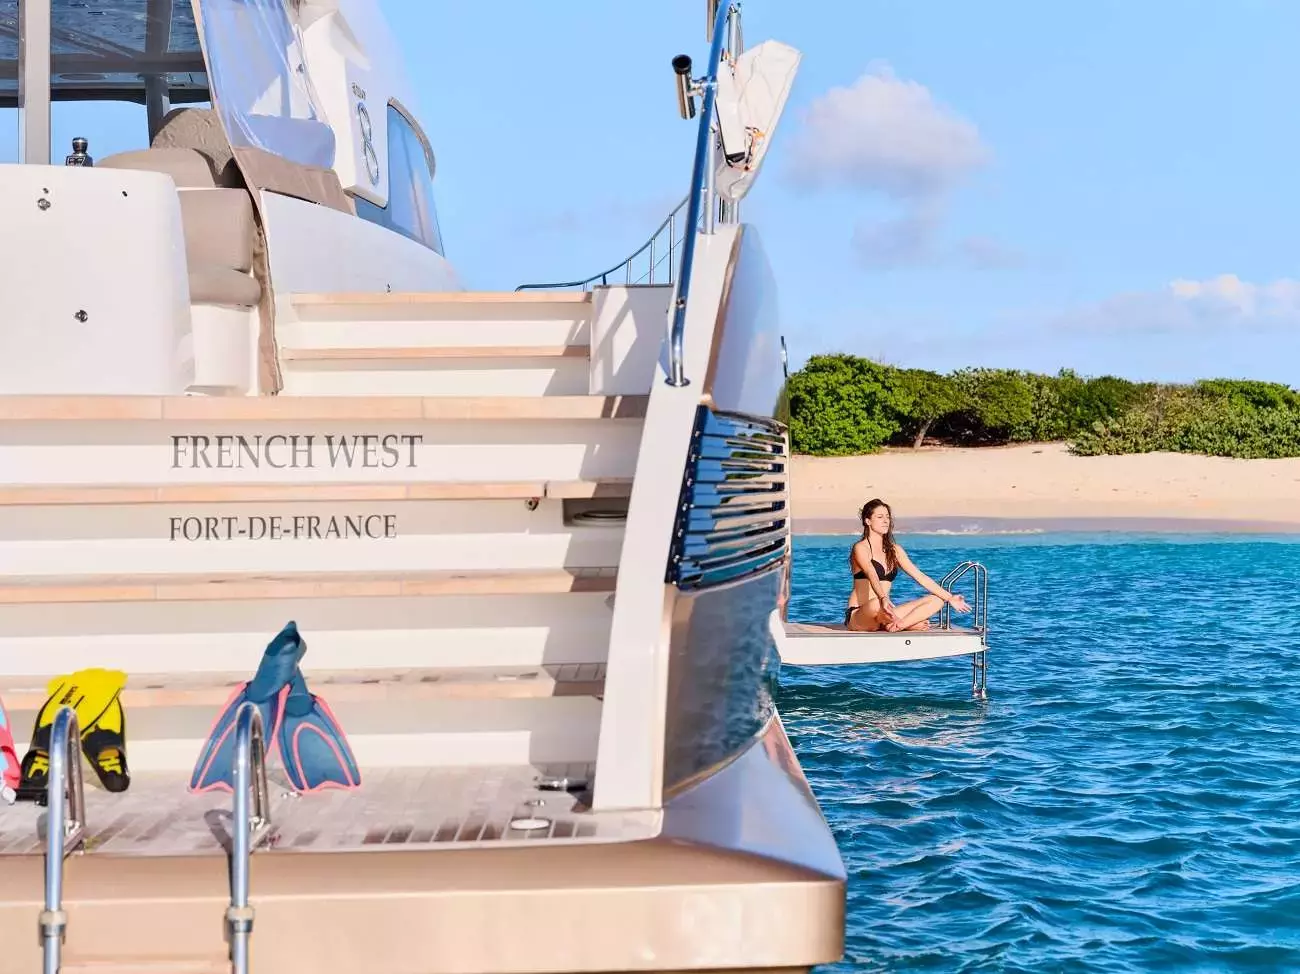 Frenchwest by Lagoon - Top rates for a Rental of a private Power Catamaran in Anguilla